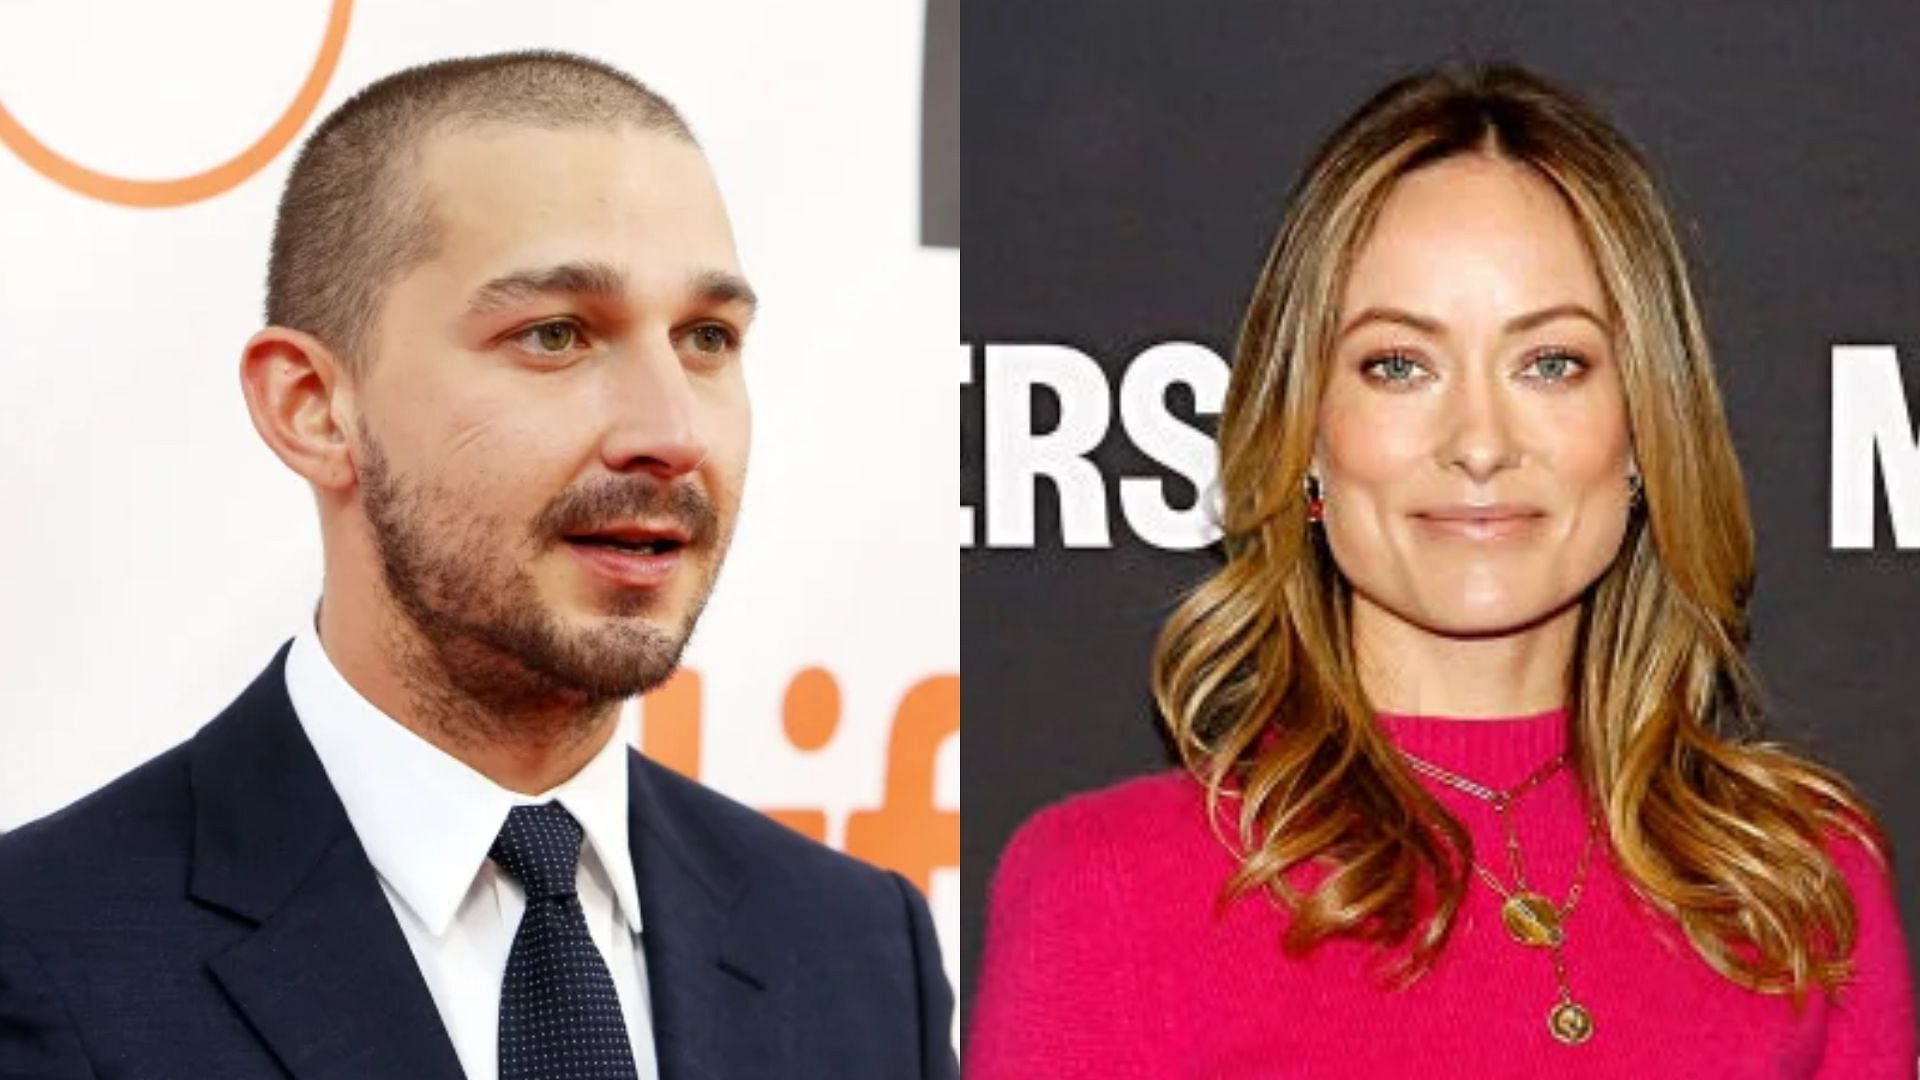 Shia LaBeouf and Olivia Wilde. (Images via Axelle/Bauer-Griffin/Rachel Murray/Getty Images)